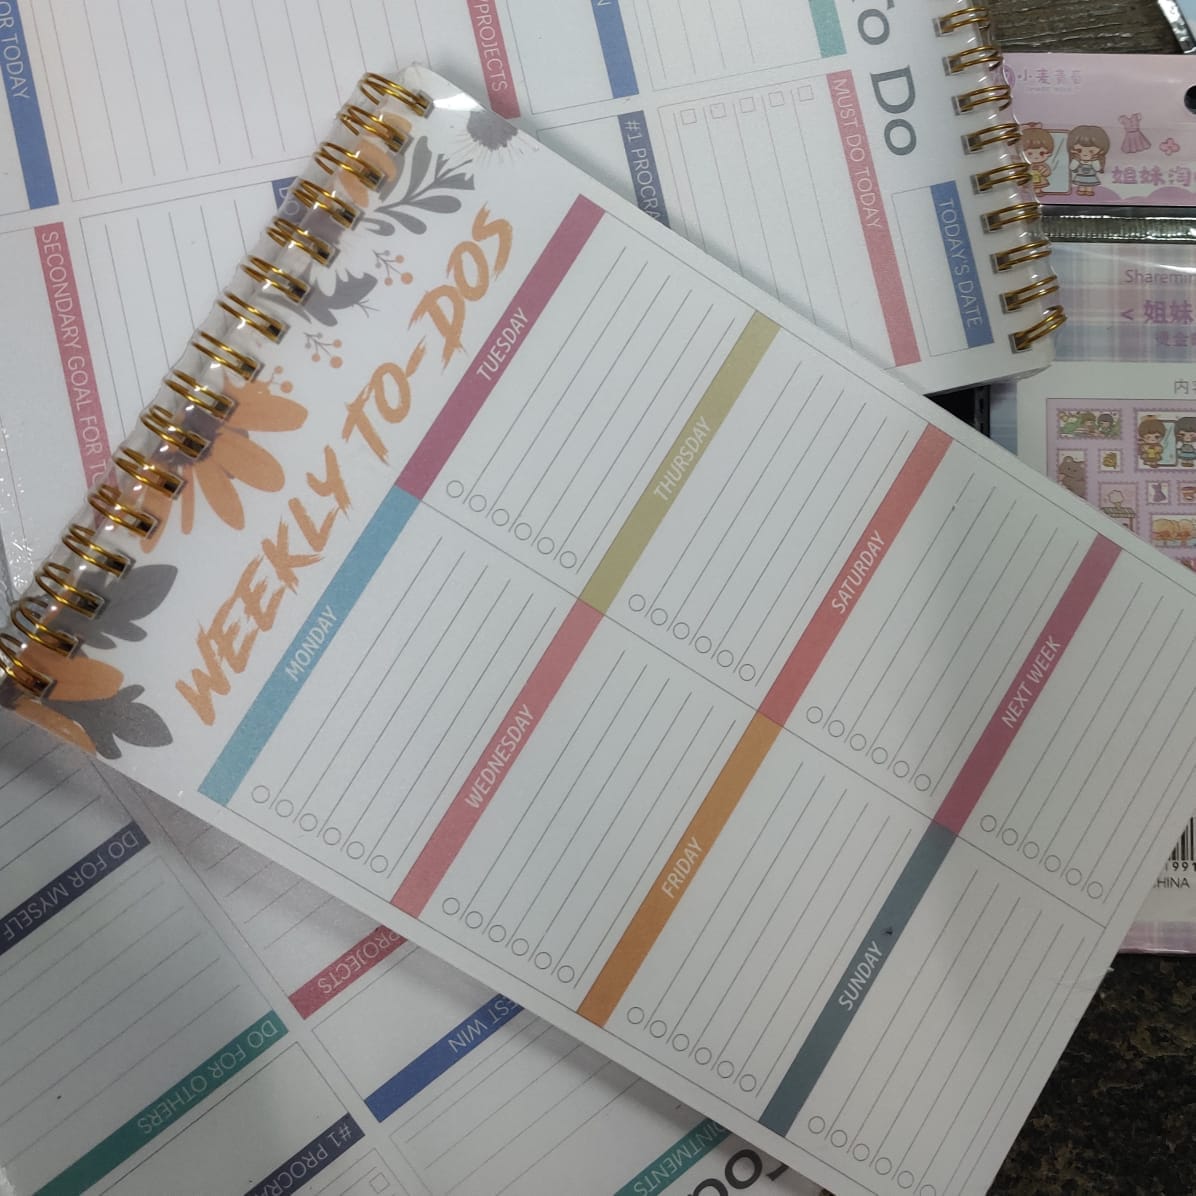 shah and company mumbai Stay Organized with Our Spiral  Planner for Students - 60 Sheets Included